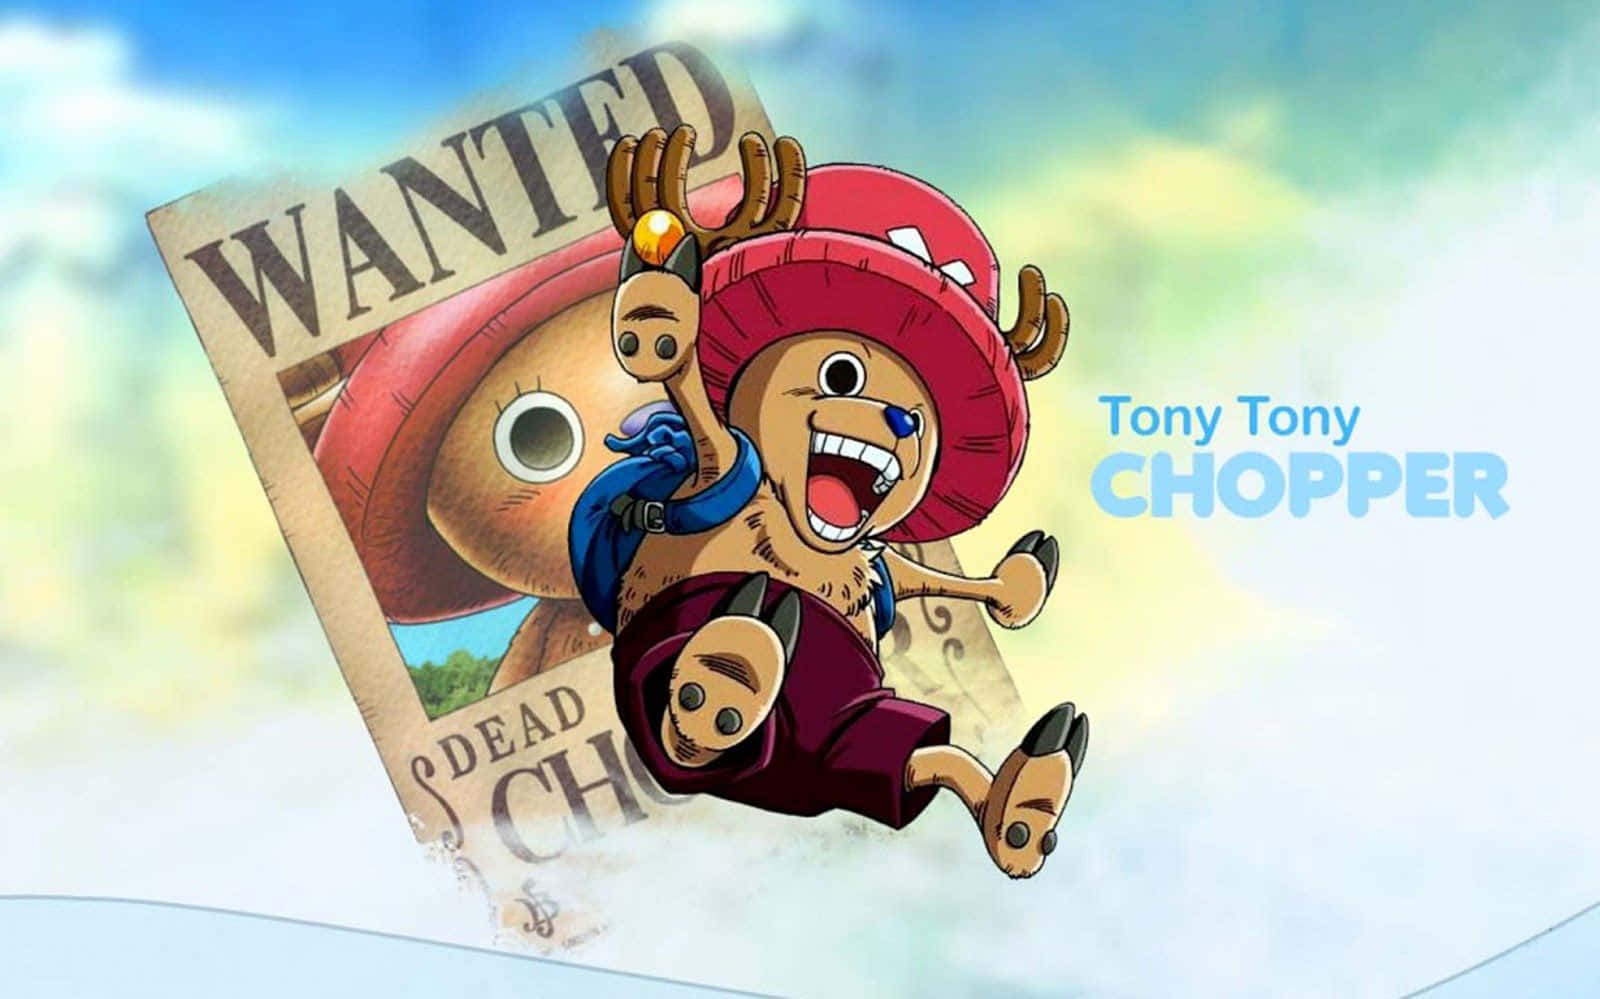 100+] One Piece Chopper Wallpapers